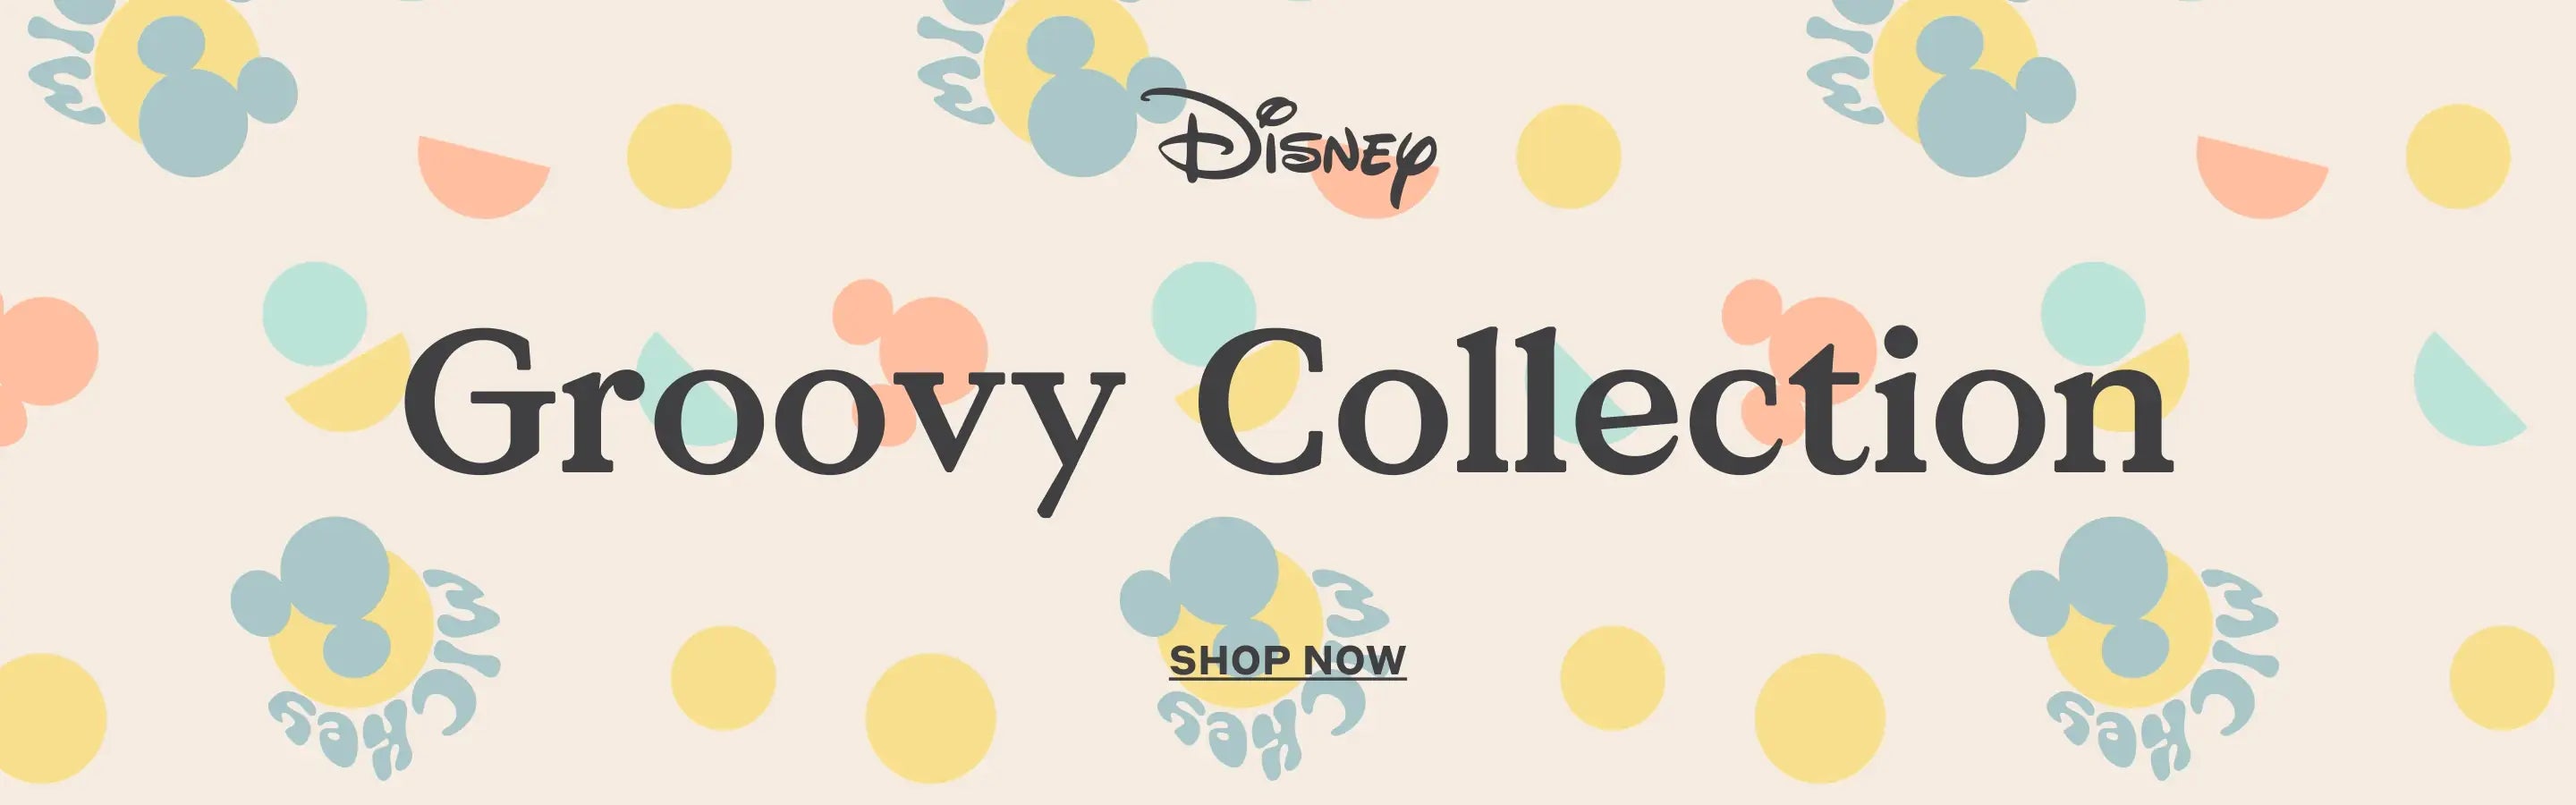 Disney Groovy Collection graphic banner with Disney characters and text 'Groovy Collection' - Shop Now